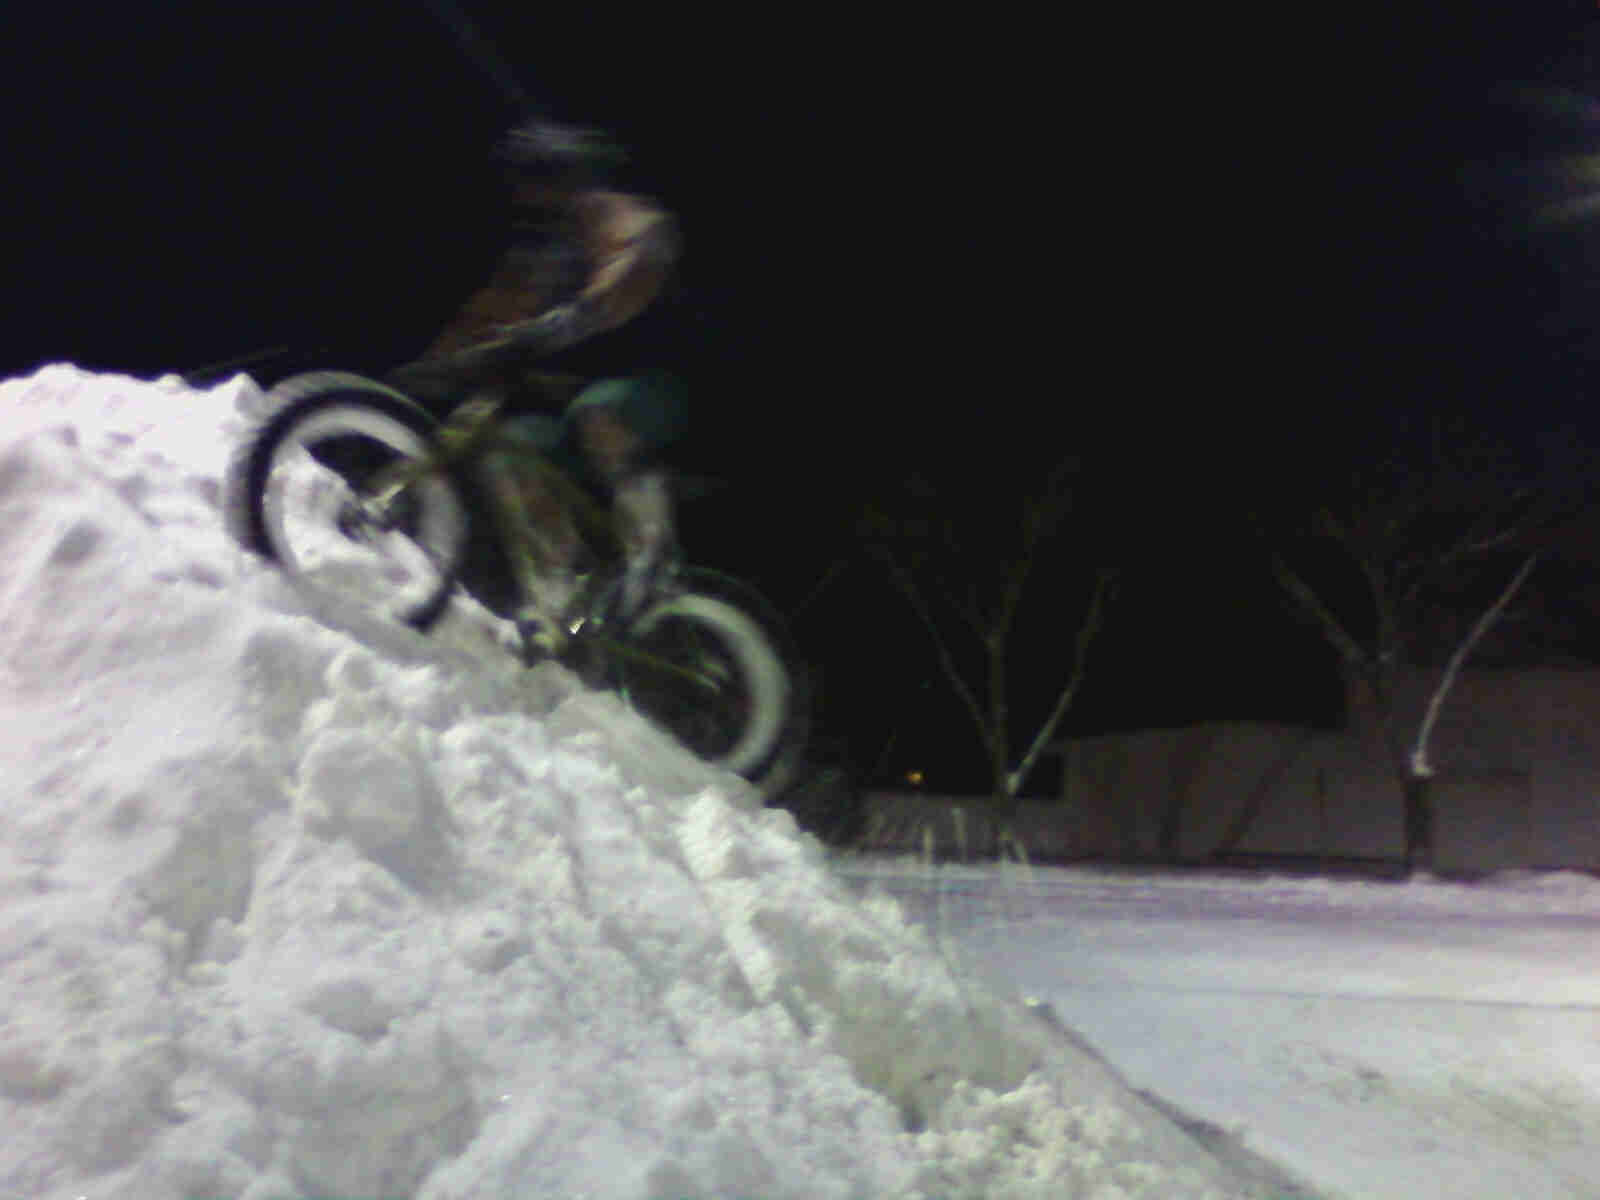 Left side view of a cyclist riding a Surly Pugsley fat bike near the top of a large snow pile, on a parking lot at night